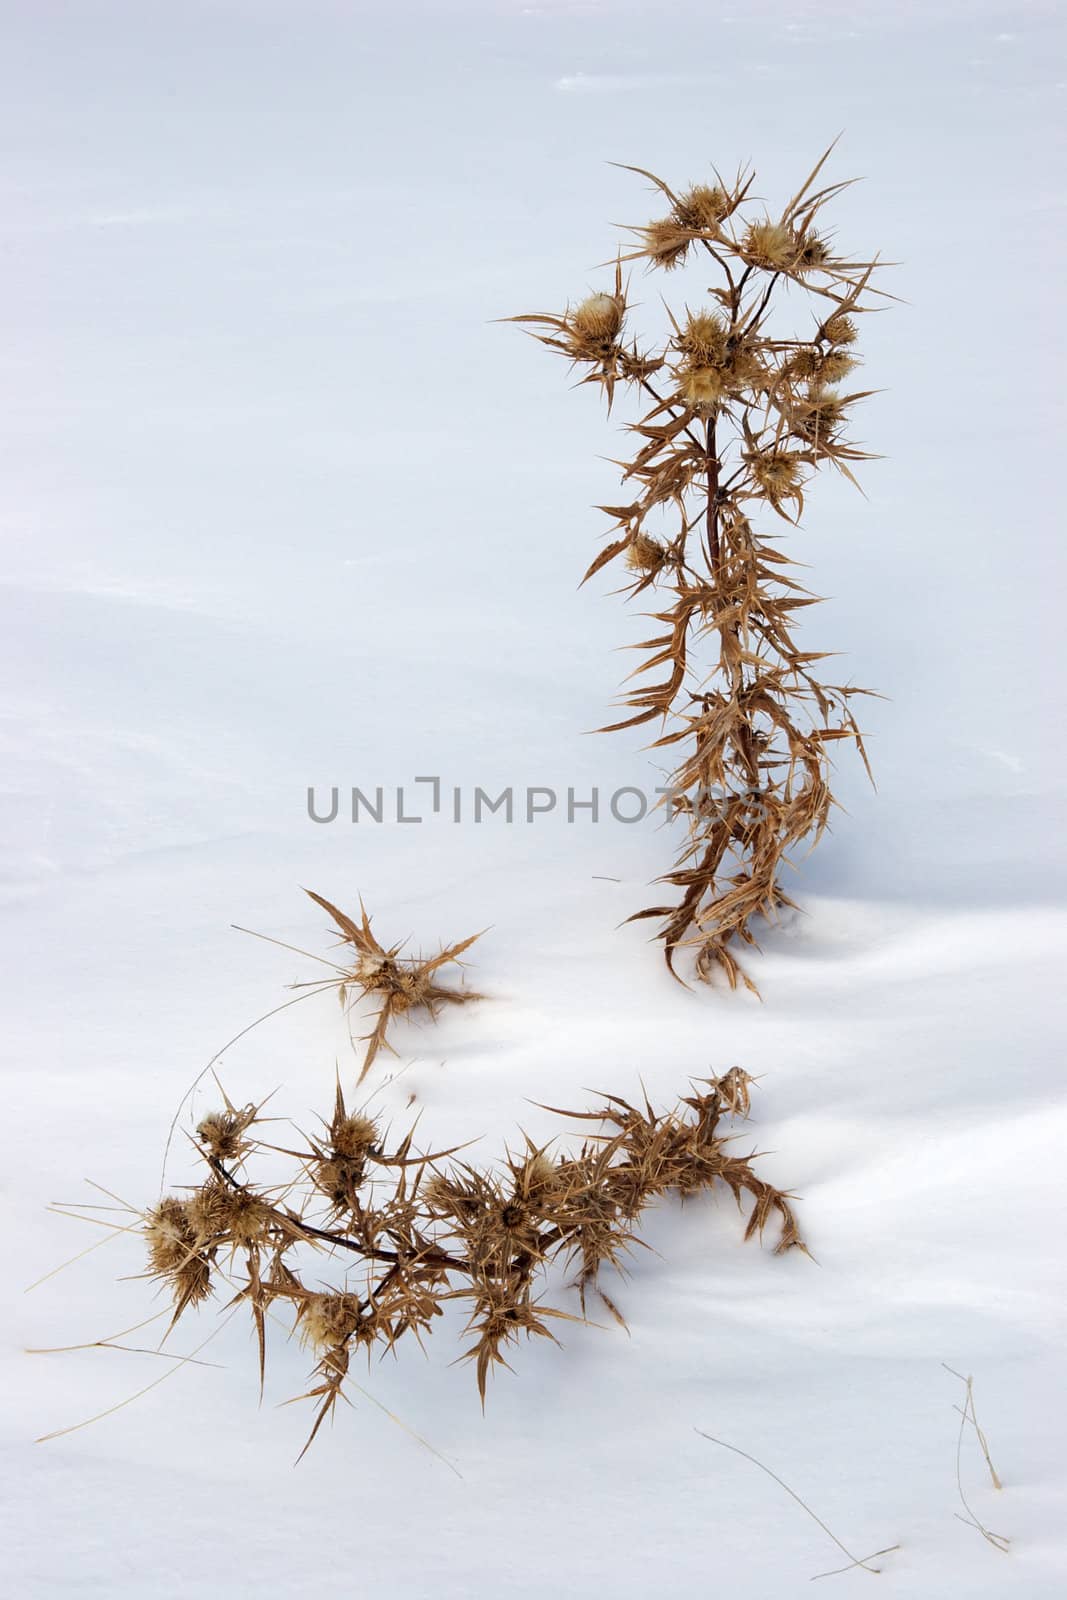 Withered thistle in deep snow at Mount Ararat slopes, eastern Turkey.